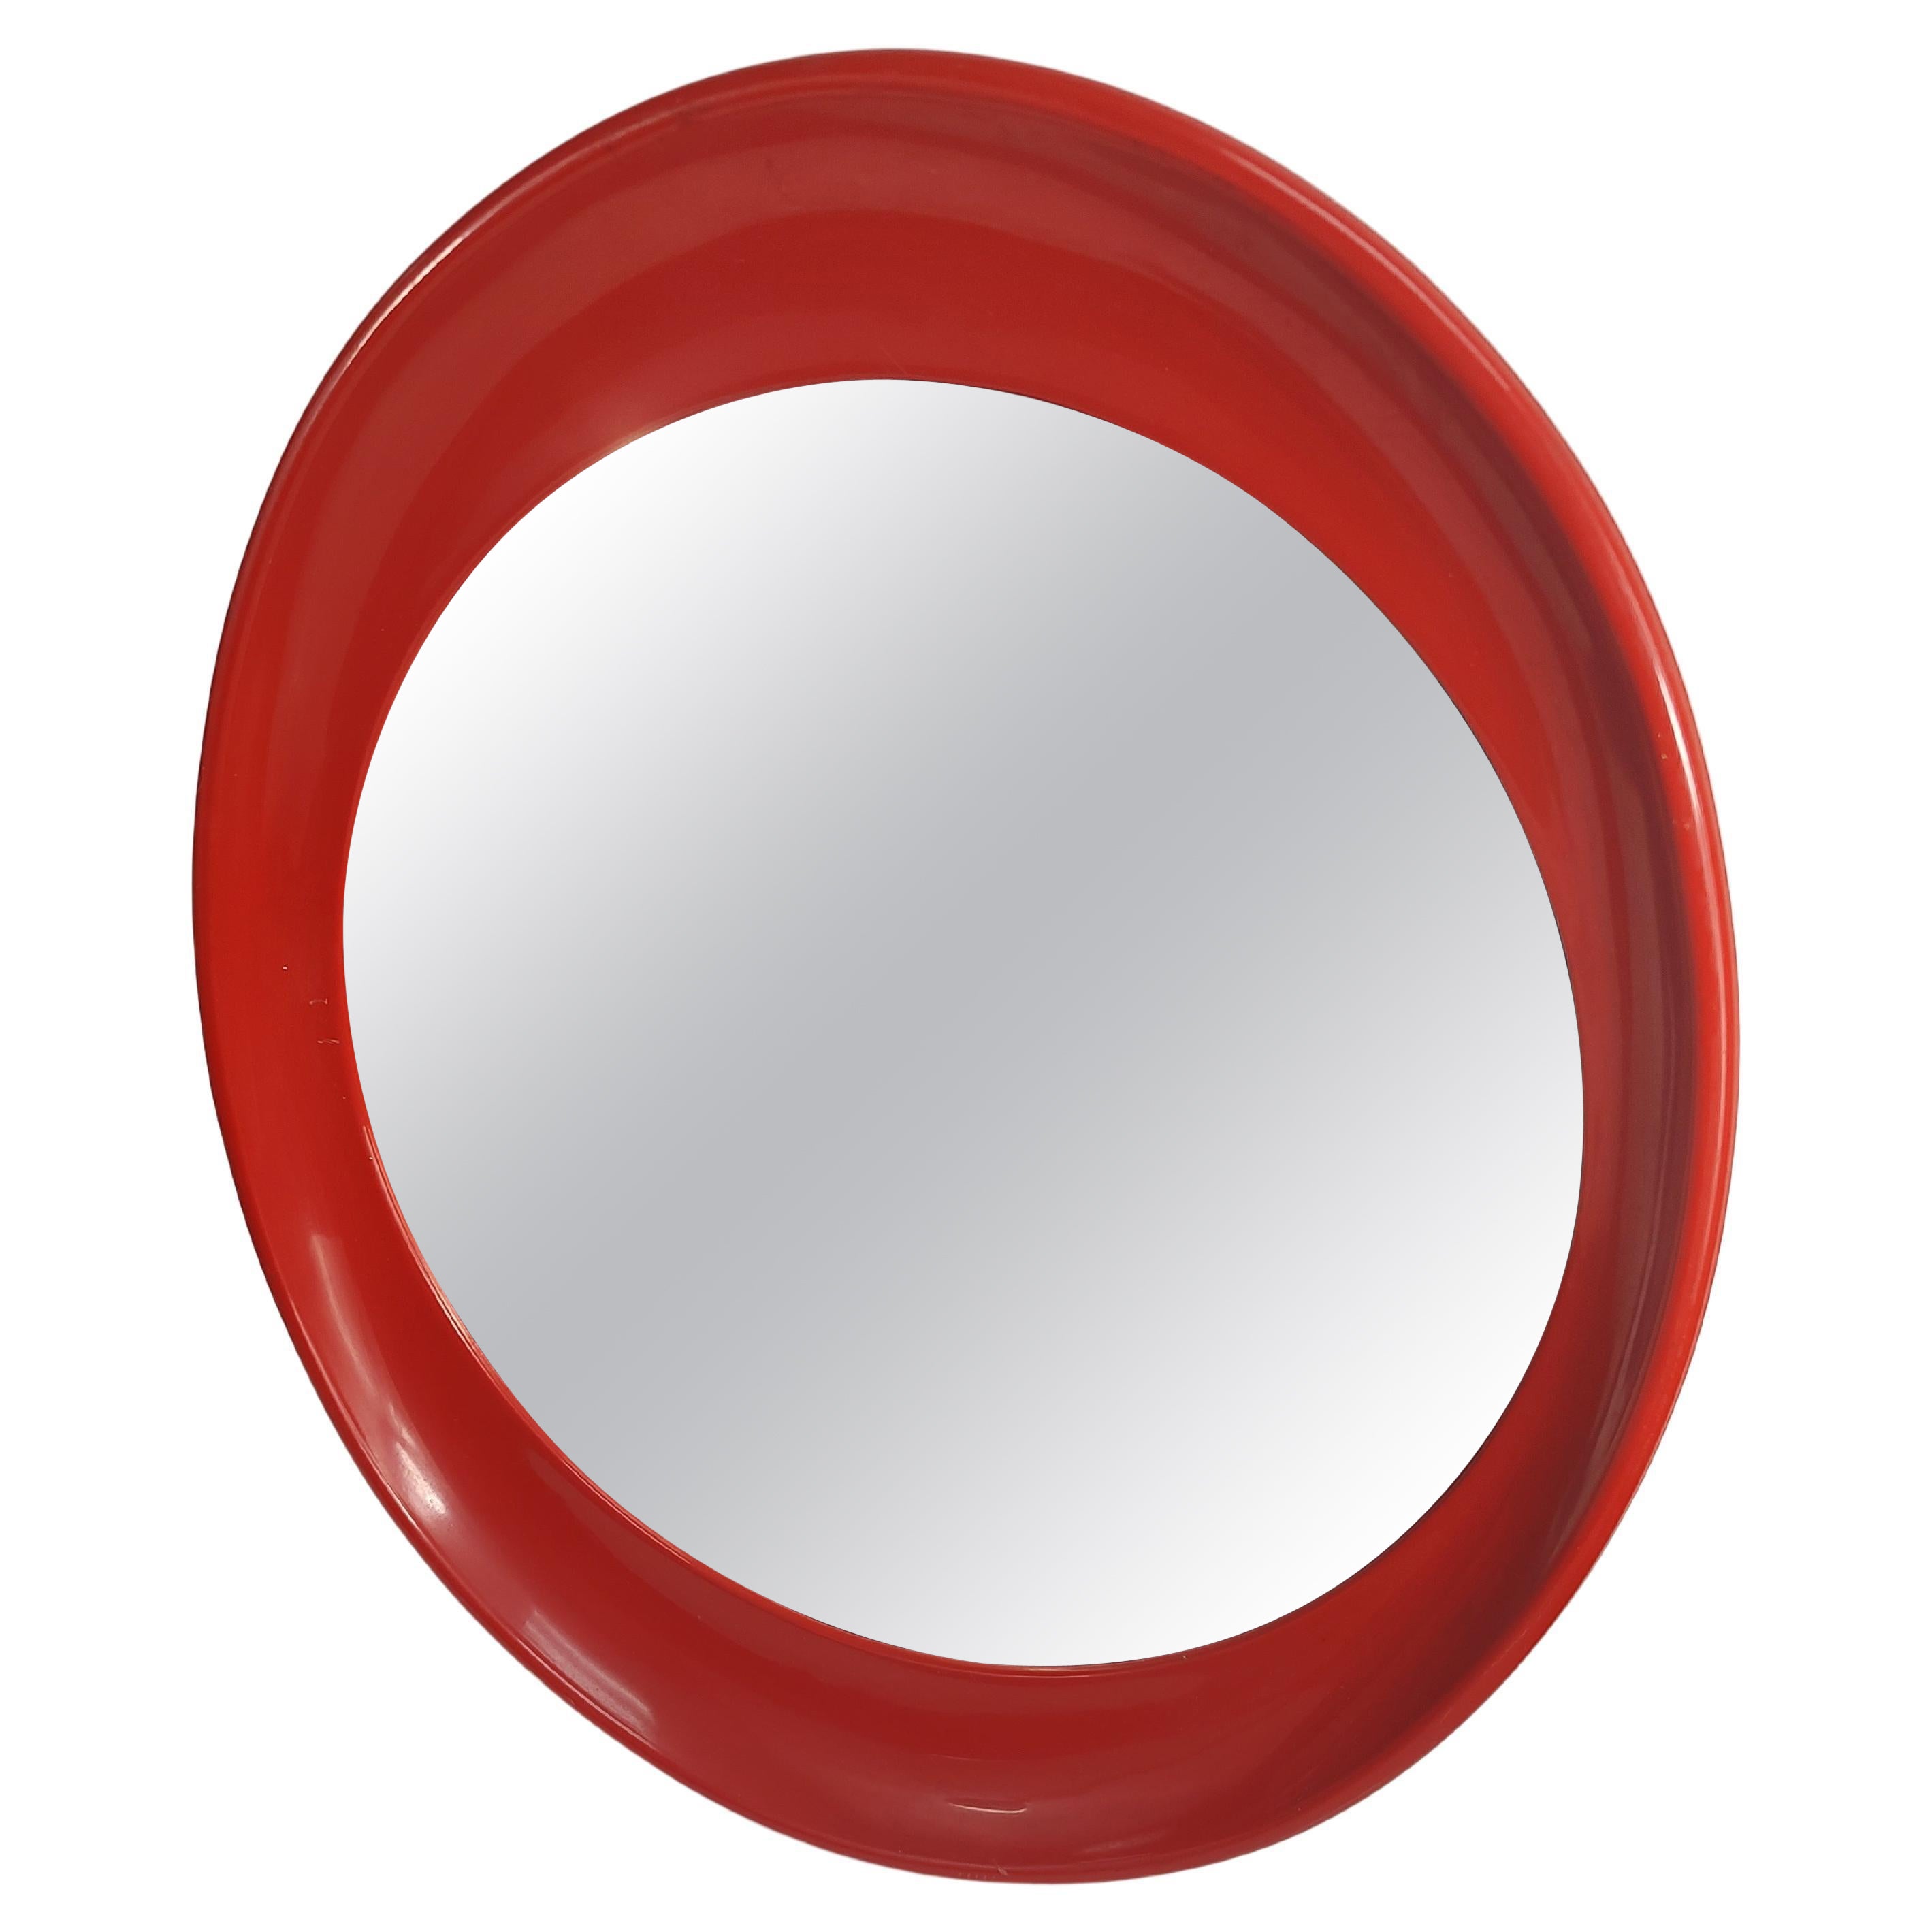 Mid Century Modern Italian Red Plastic Oval Mirror Attributed to Joe Colombo For Sale